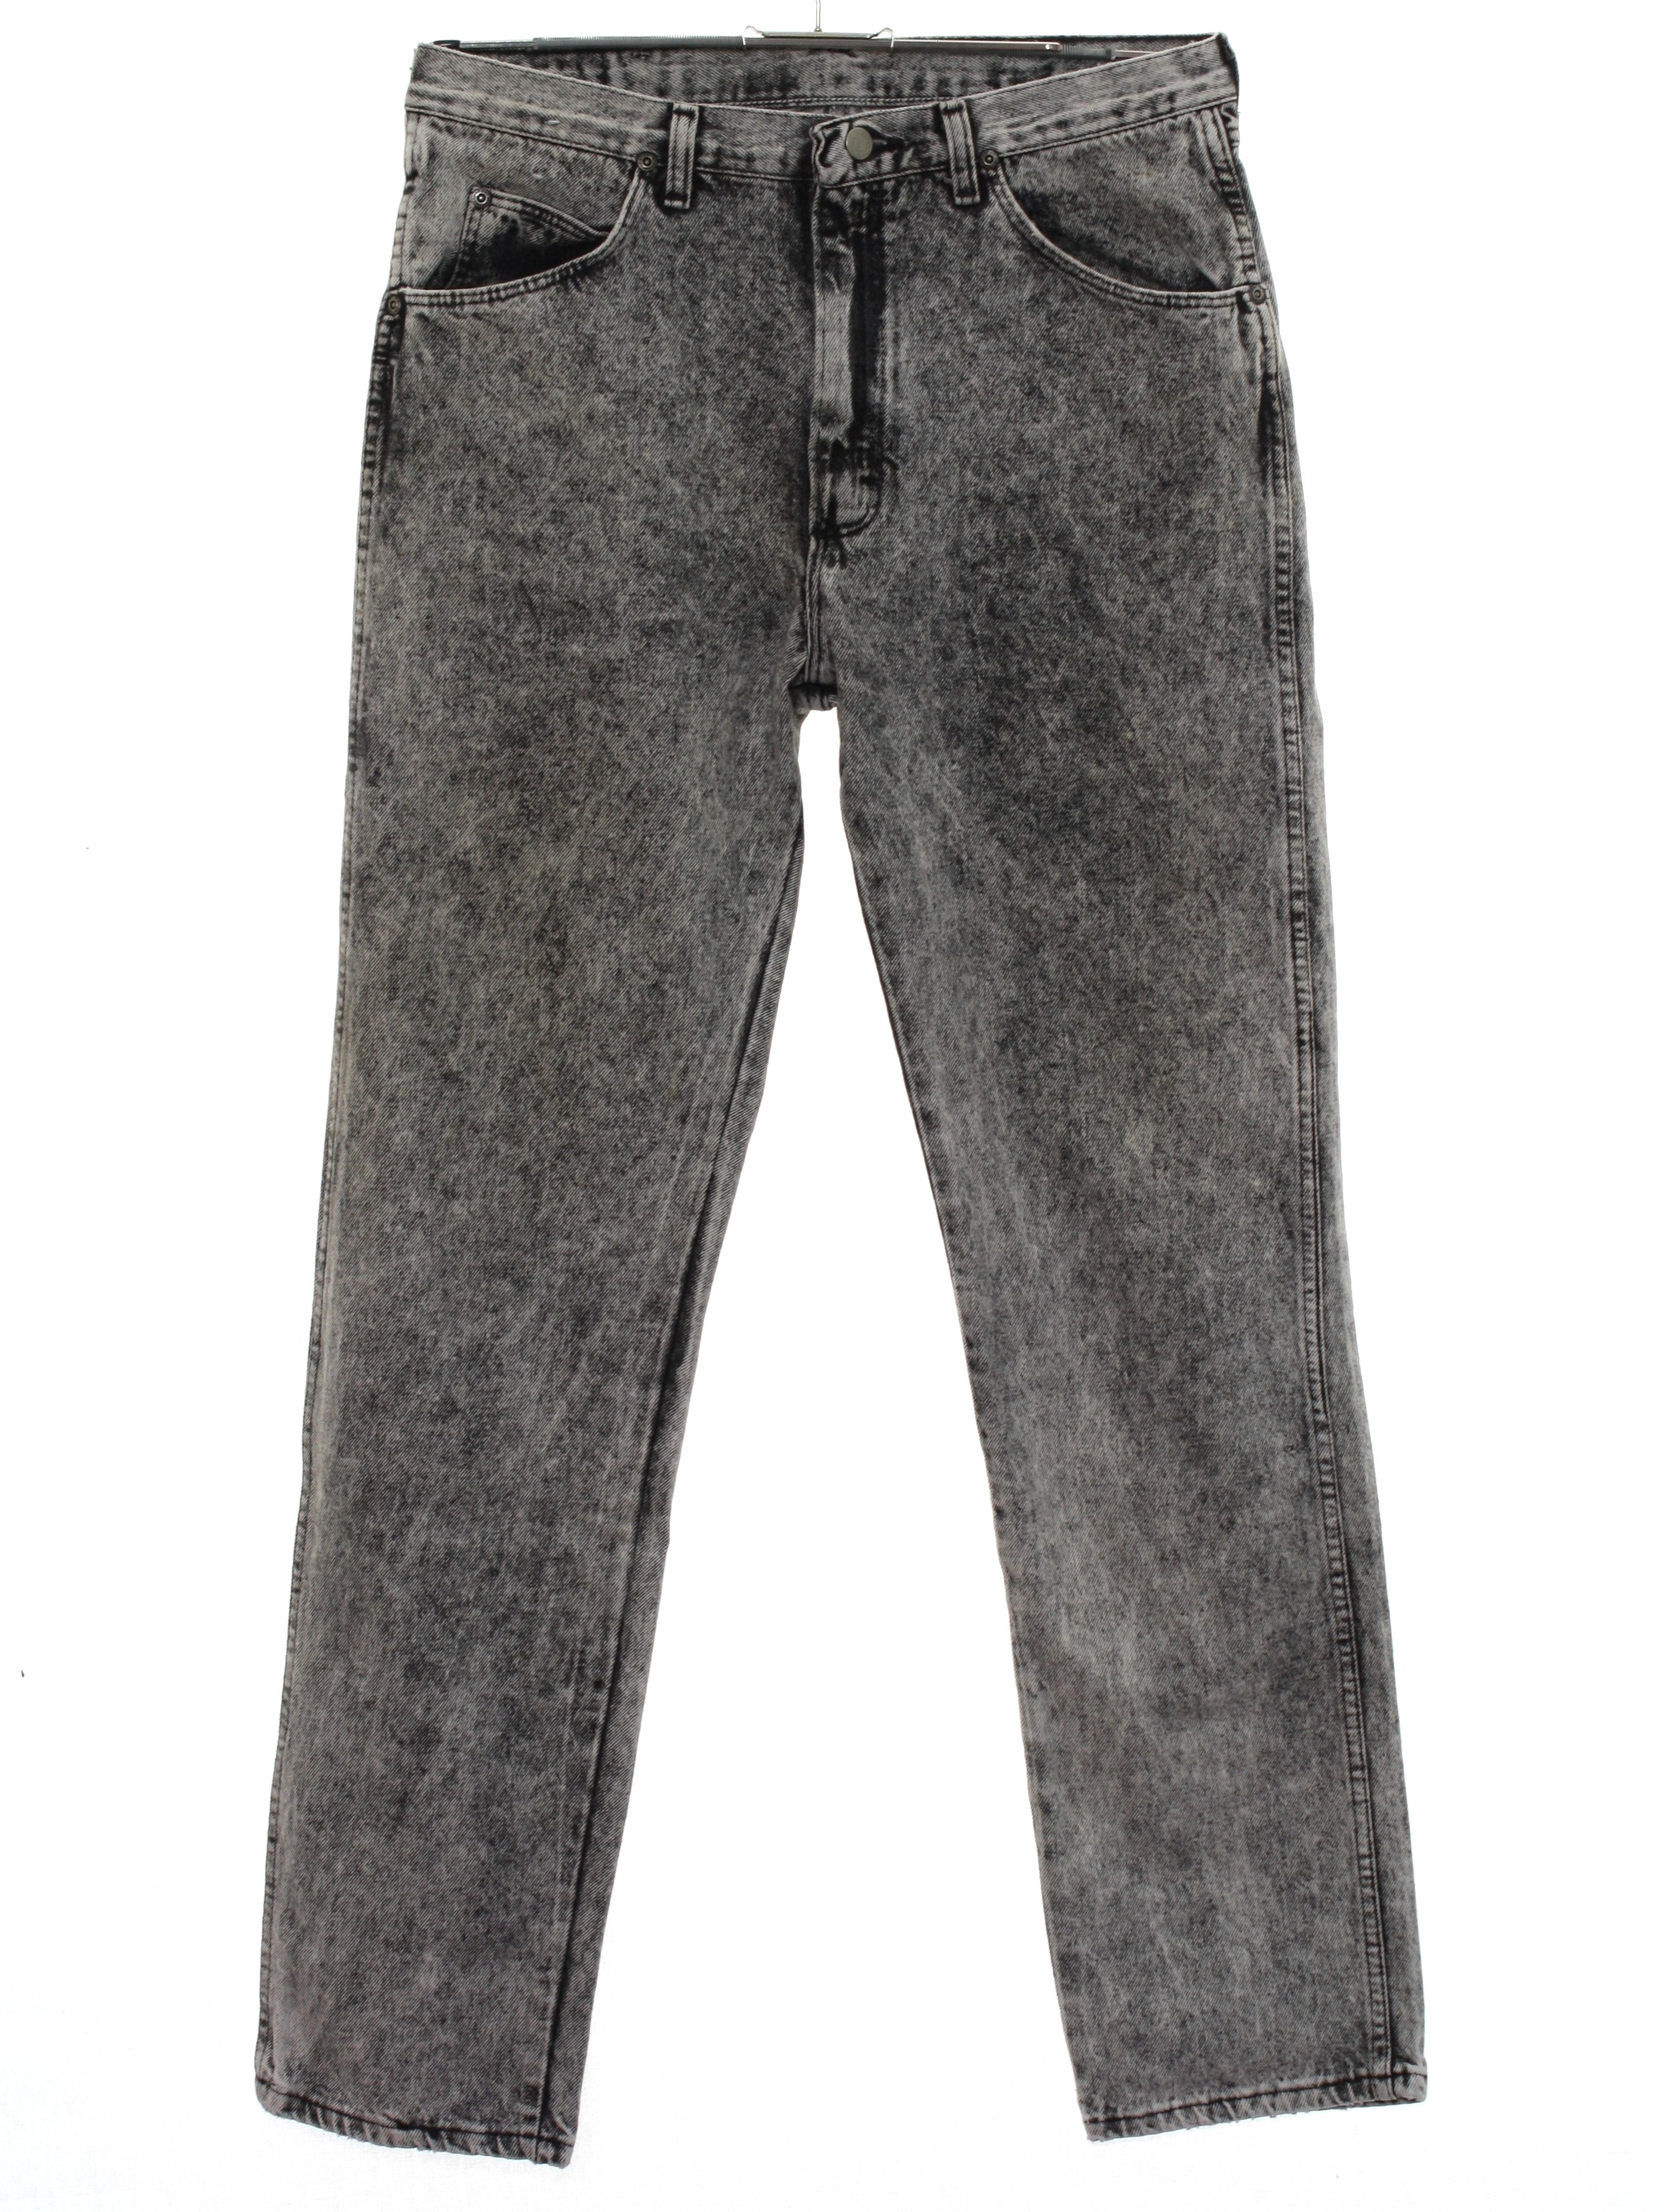 Eighties Pants: Late 80s or early 90s Wrangler- Mens acid washed